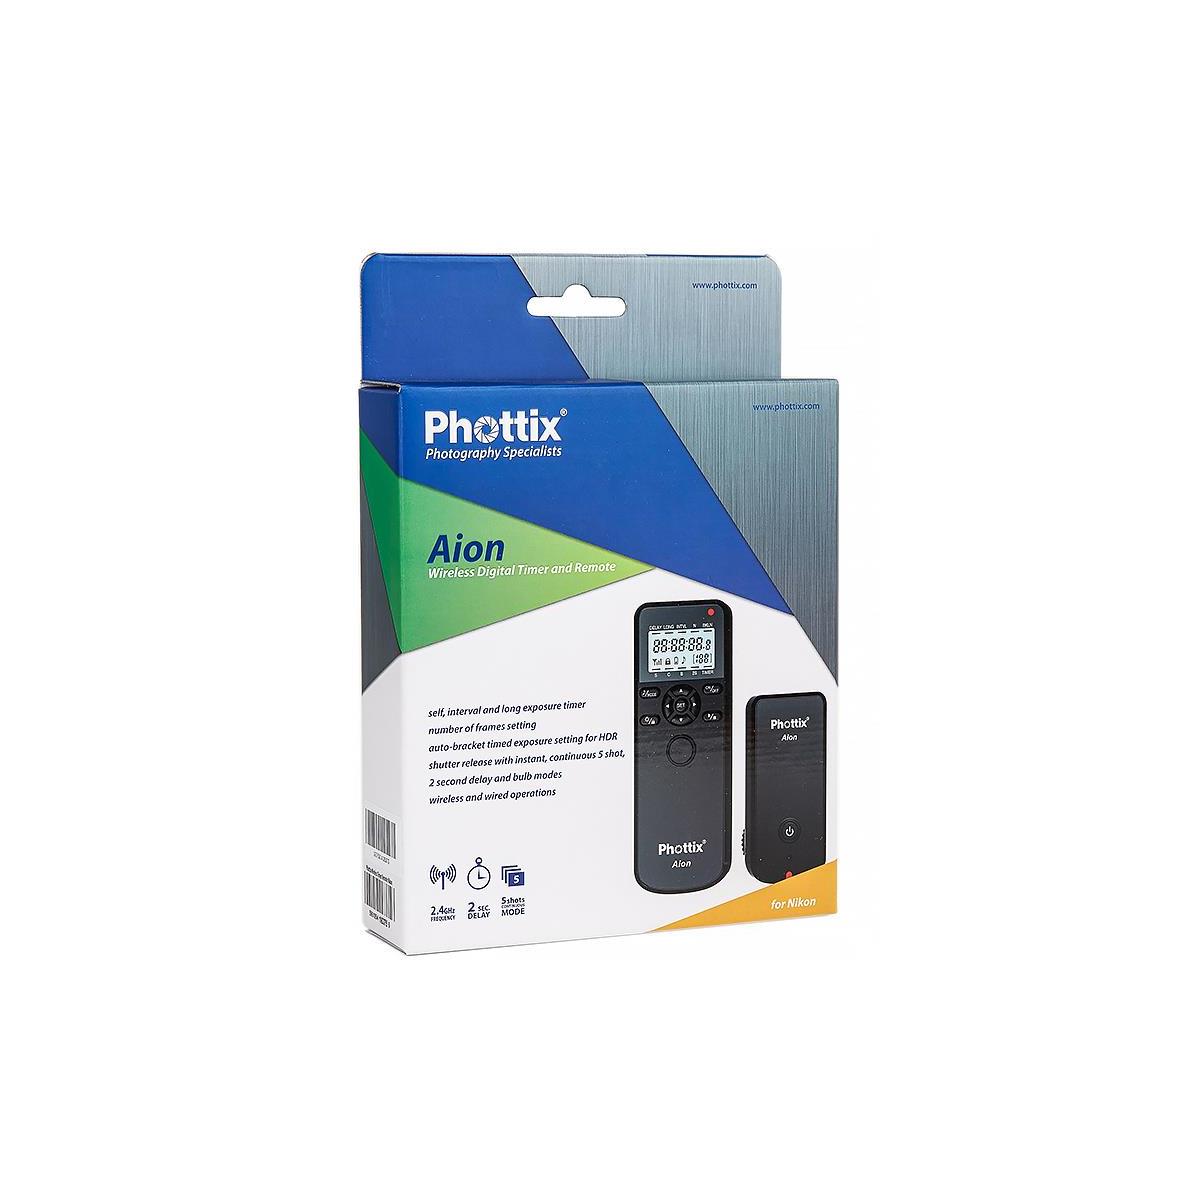 Phottix Aion Wireless Digital Timer and  Remote - for Canon, Nikon, and Sony (PH16373)